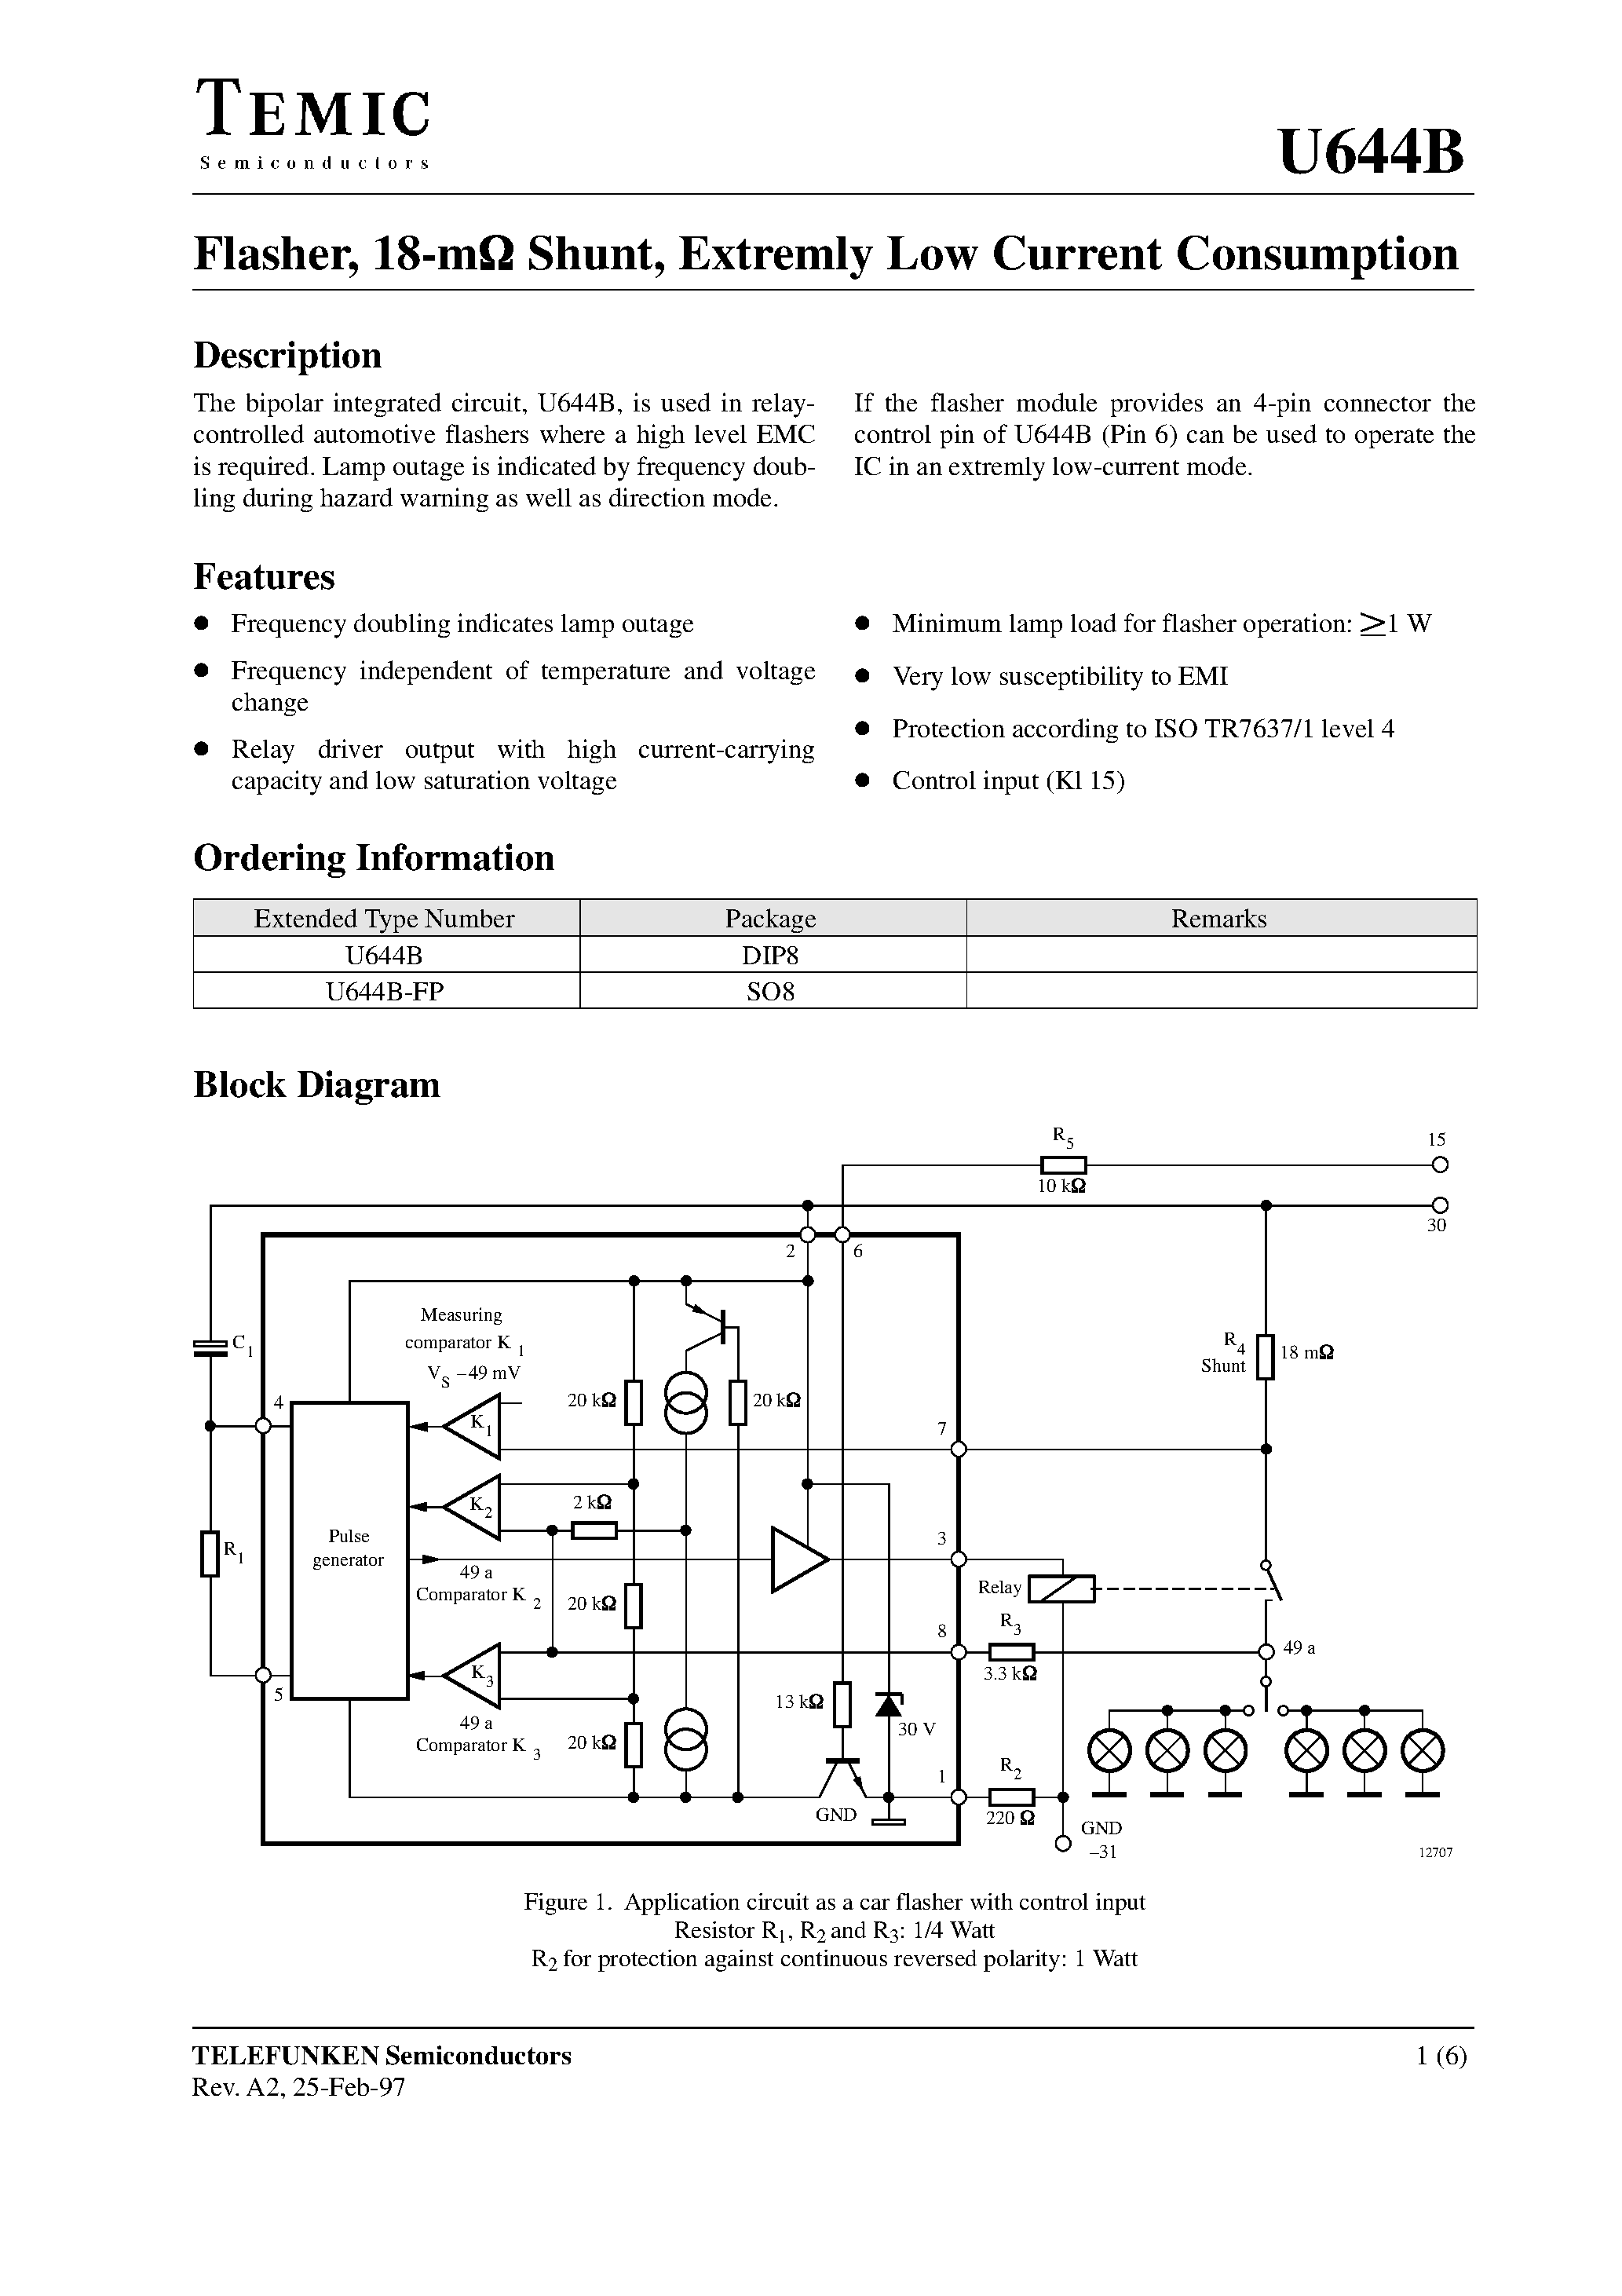 Datasheet U644B-FP - Flasher/ 18-m Shunt/ Extremly Low Current Consumption page 1